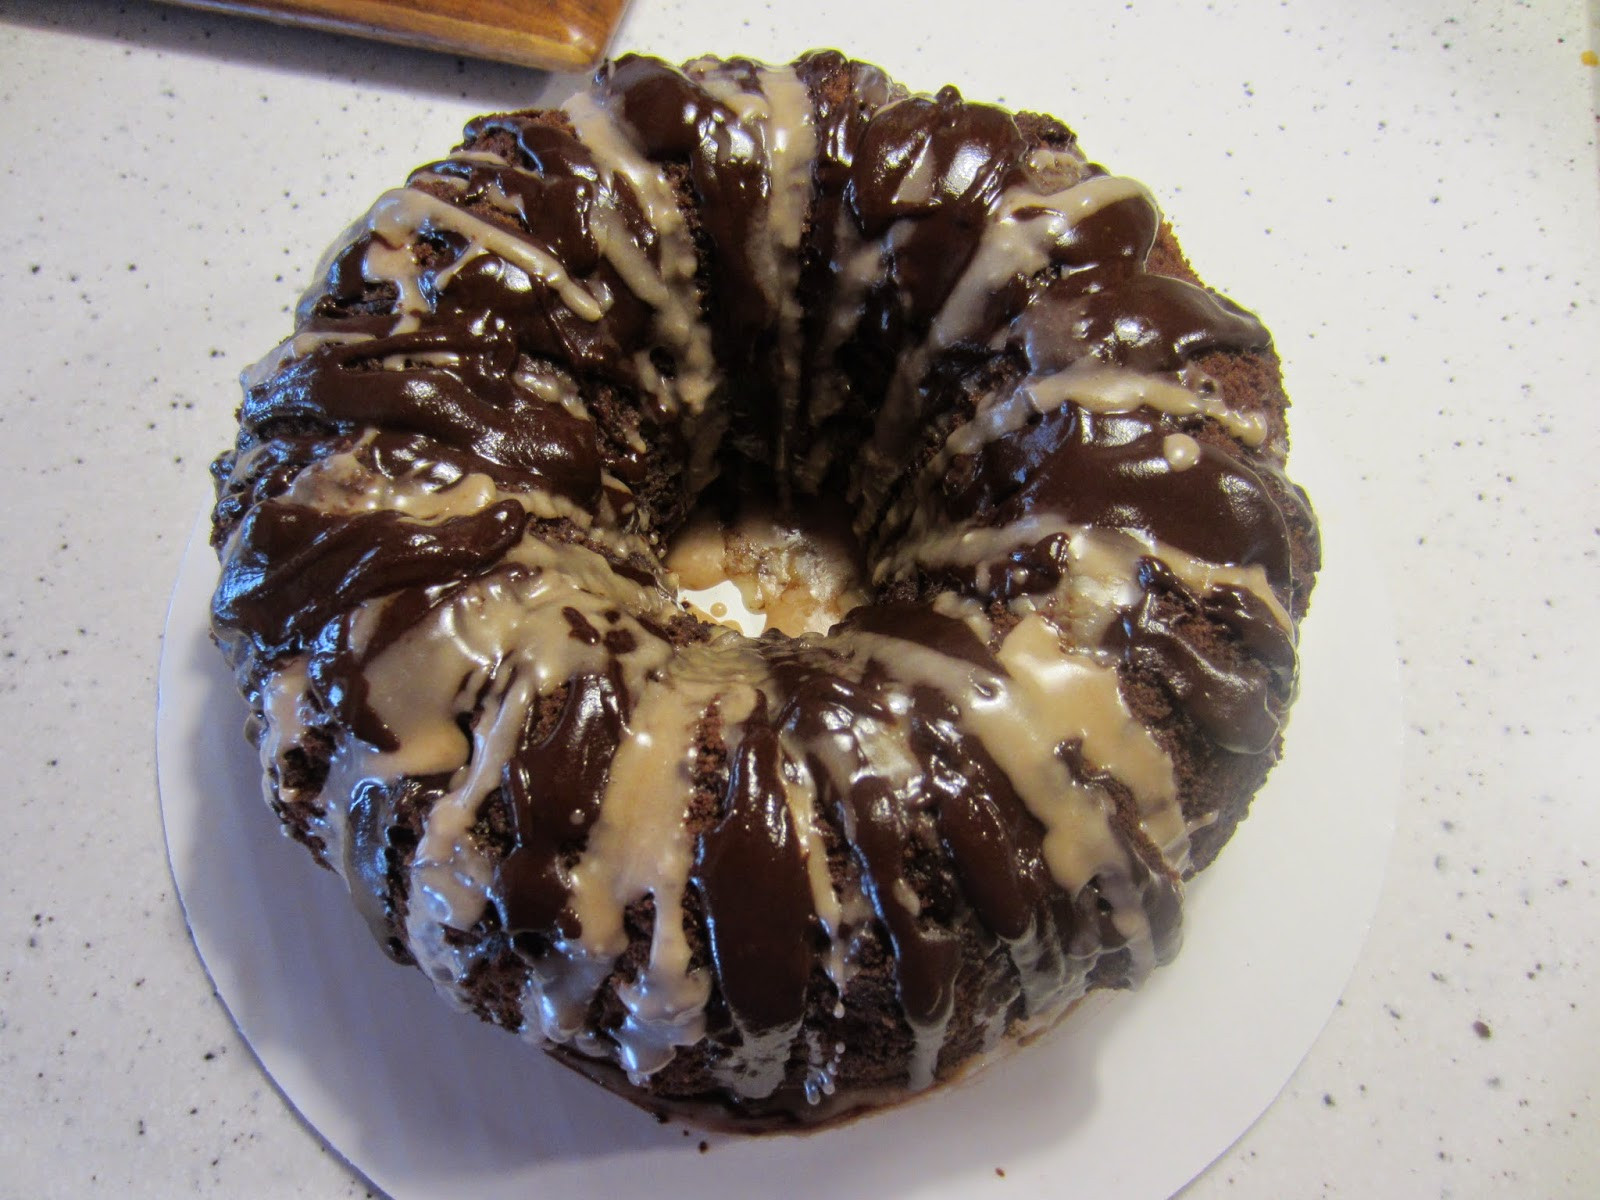 Buttermilk Pound Cake Southern Living
 THE FOOD OF LOVE Triple Chocolate Buttermilk Pound Cake